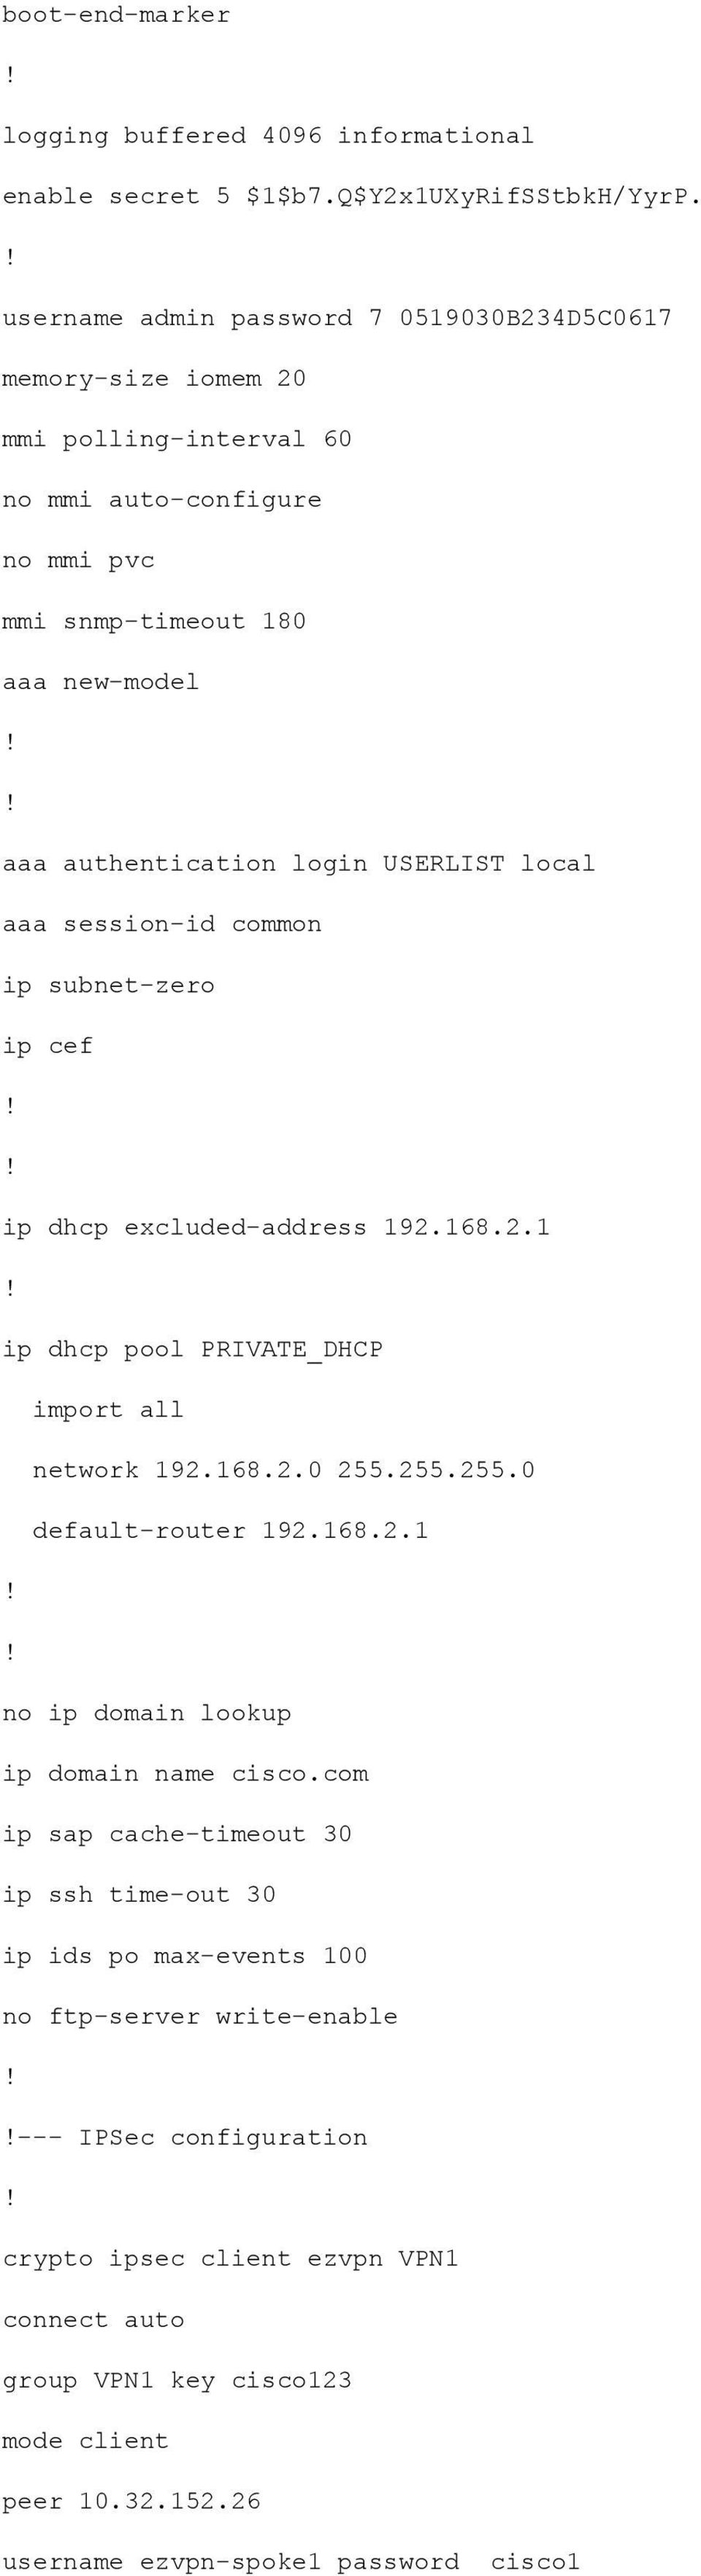 local aaa session-id common ip subnet-zero ip cef ip dhcp excluded-address 192.168.2.1 ip dhcp pool PRIVATE_DHCP import all network 192.168.2.0 255.255.255.0 default-router 192.168.2.1 no ip domain lookup ip domain name cisco.